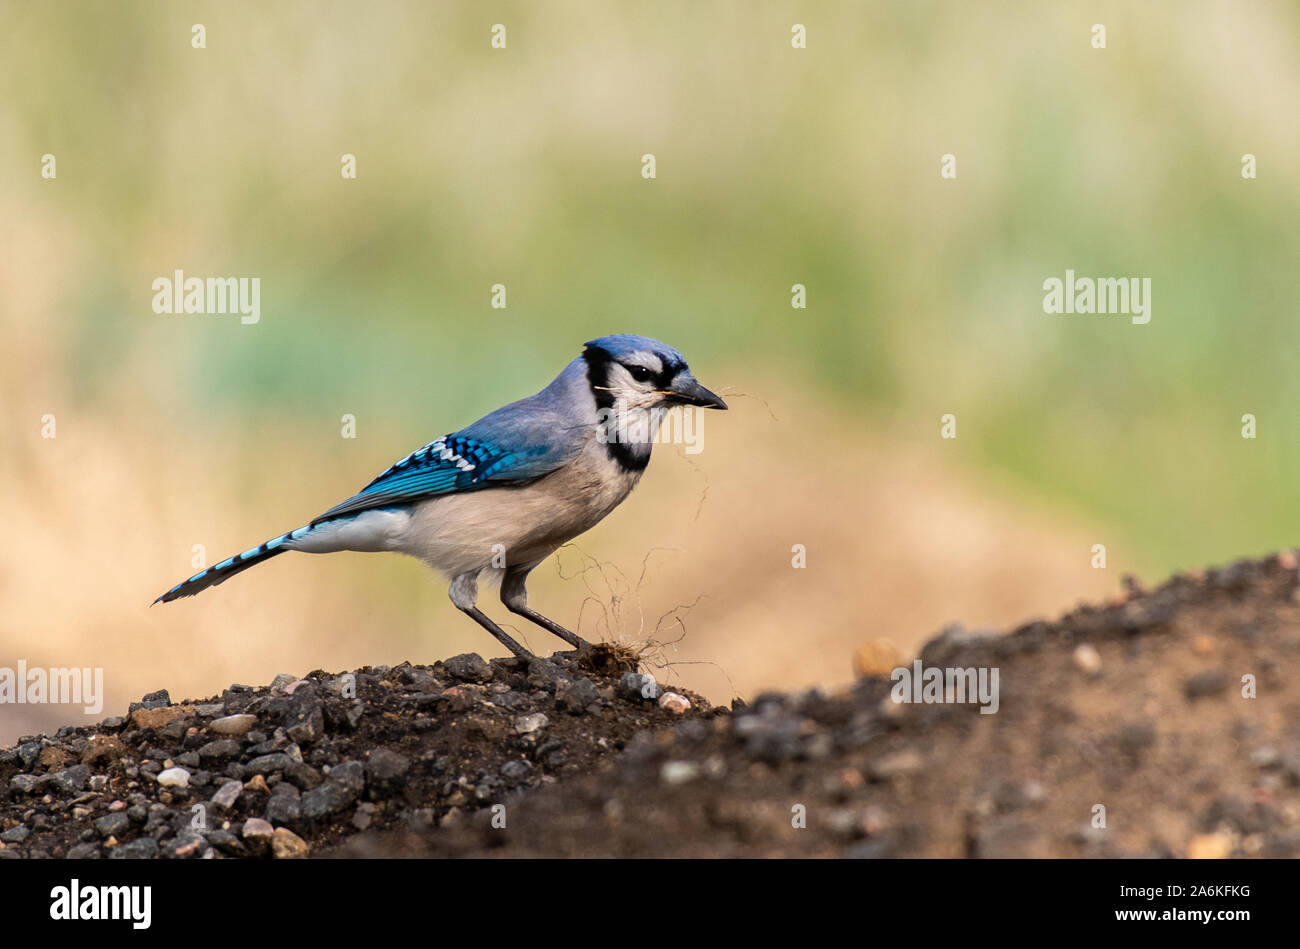 A Beautiful Blue Jay Foraging for Food on the Ground Stock Photo